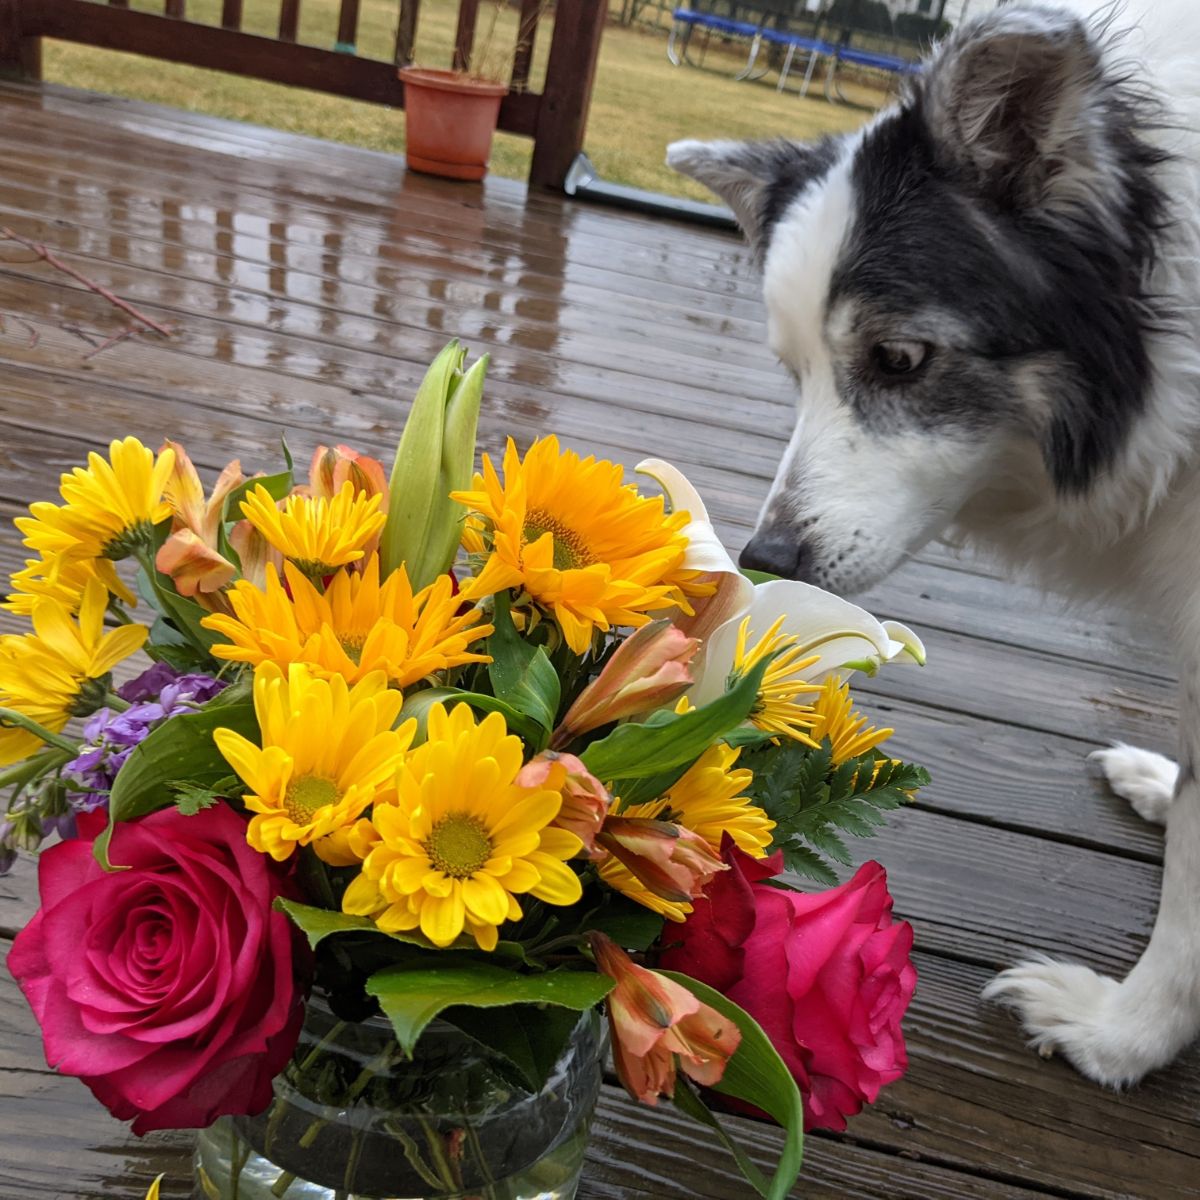 Border collie sniffing bouquet of flowers on a wooden deck in the rain